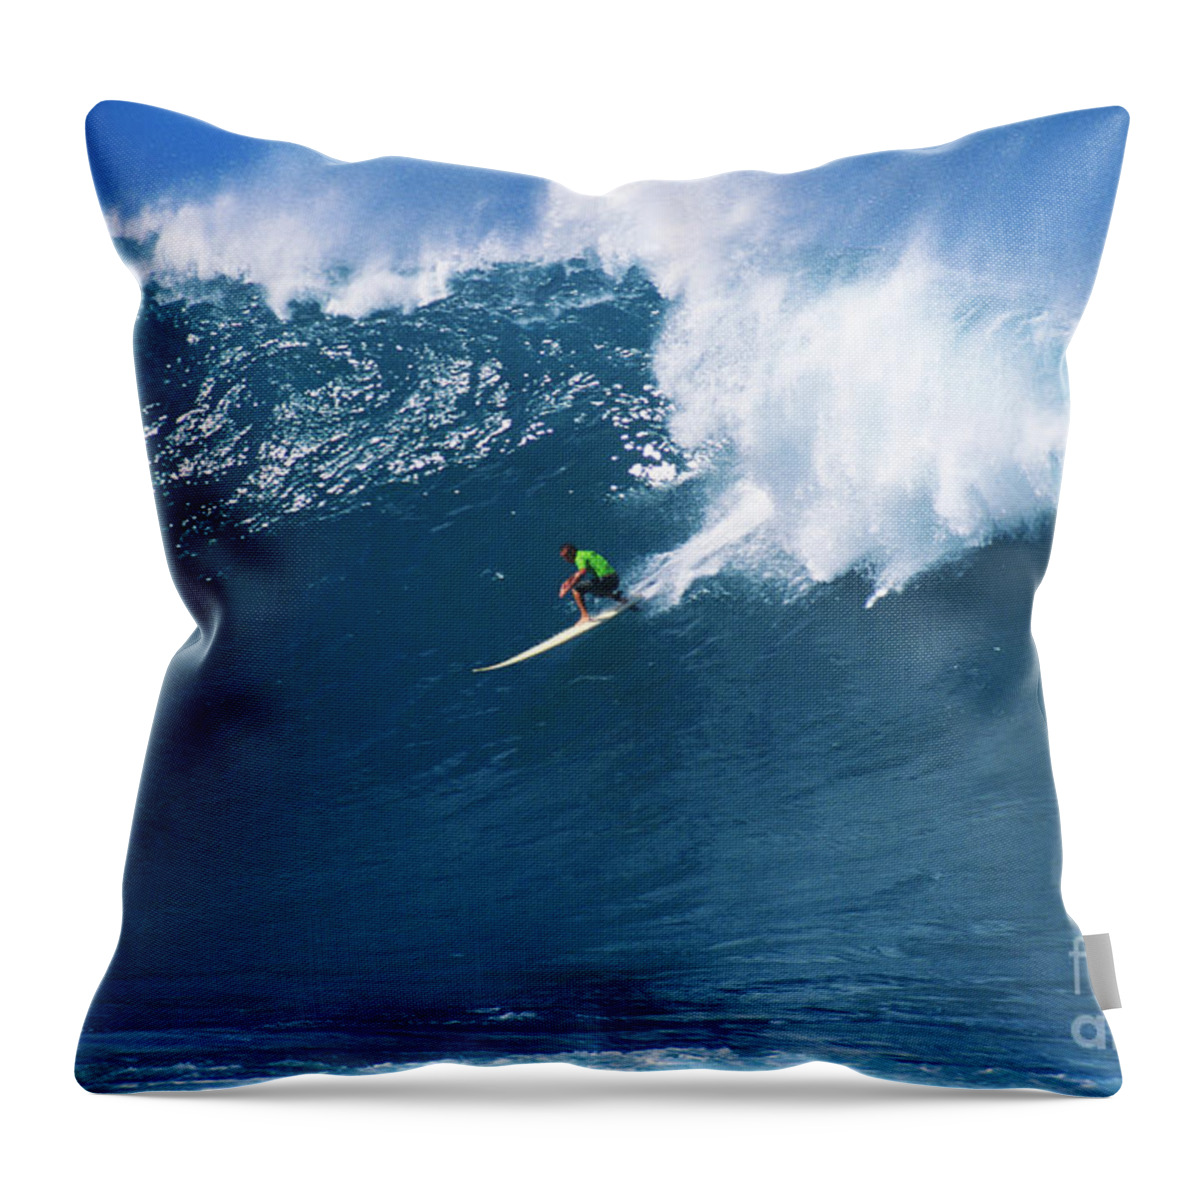 Adrenaline Throw Pillow featuring the photograph Noah At Waimea by Vince Cavataio - Printscapes